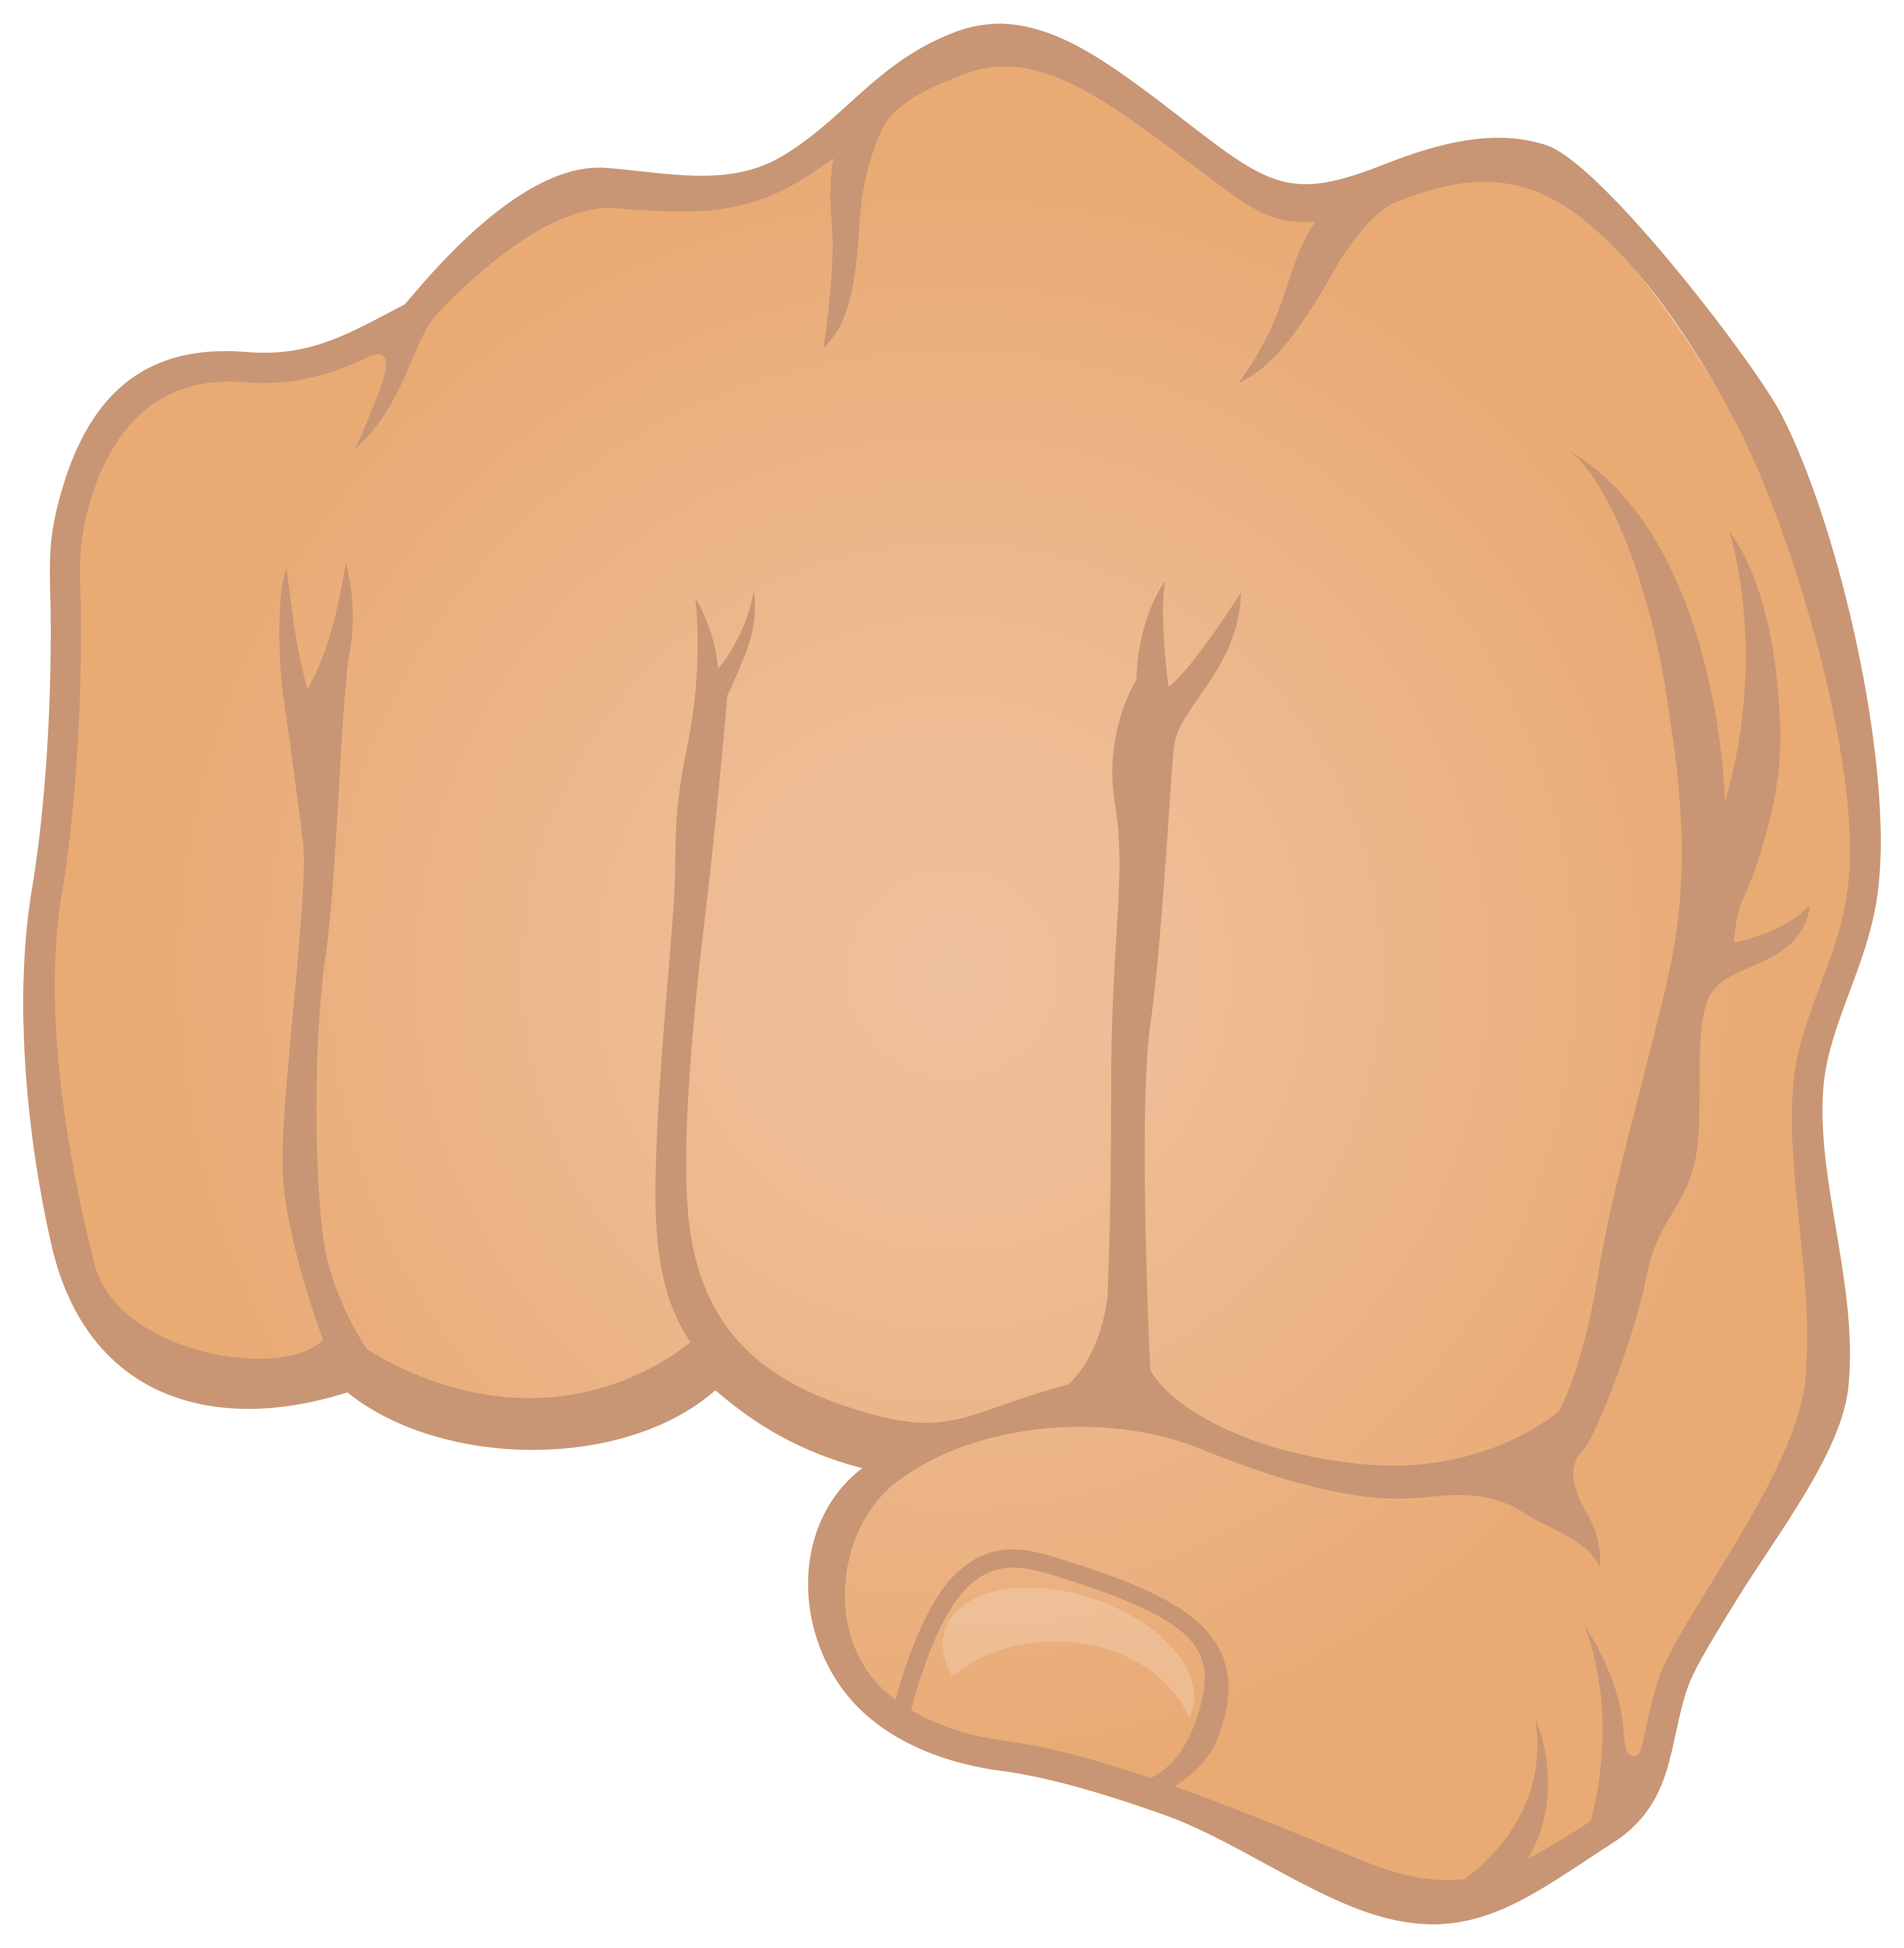 Fist Punch PNG Clip Art Image​ | Gallery Yopriceville - High-Quality Free  Images and Transparent PNG Clipart